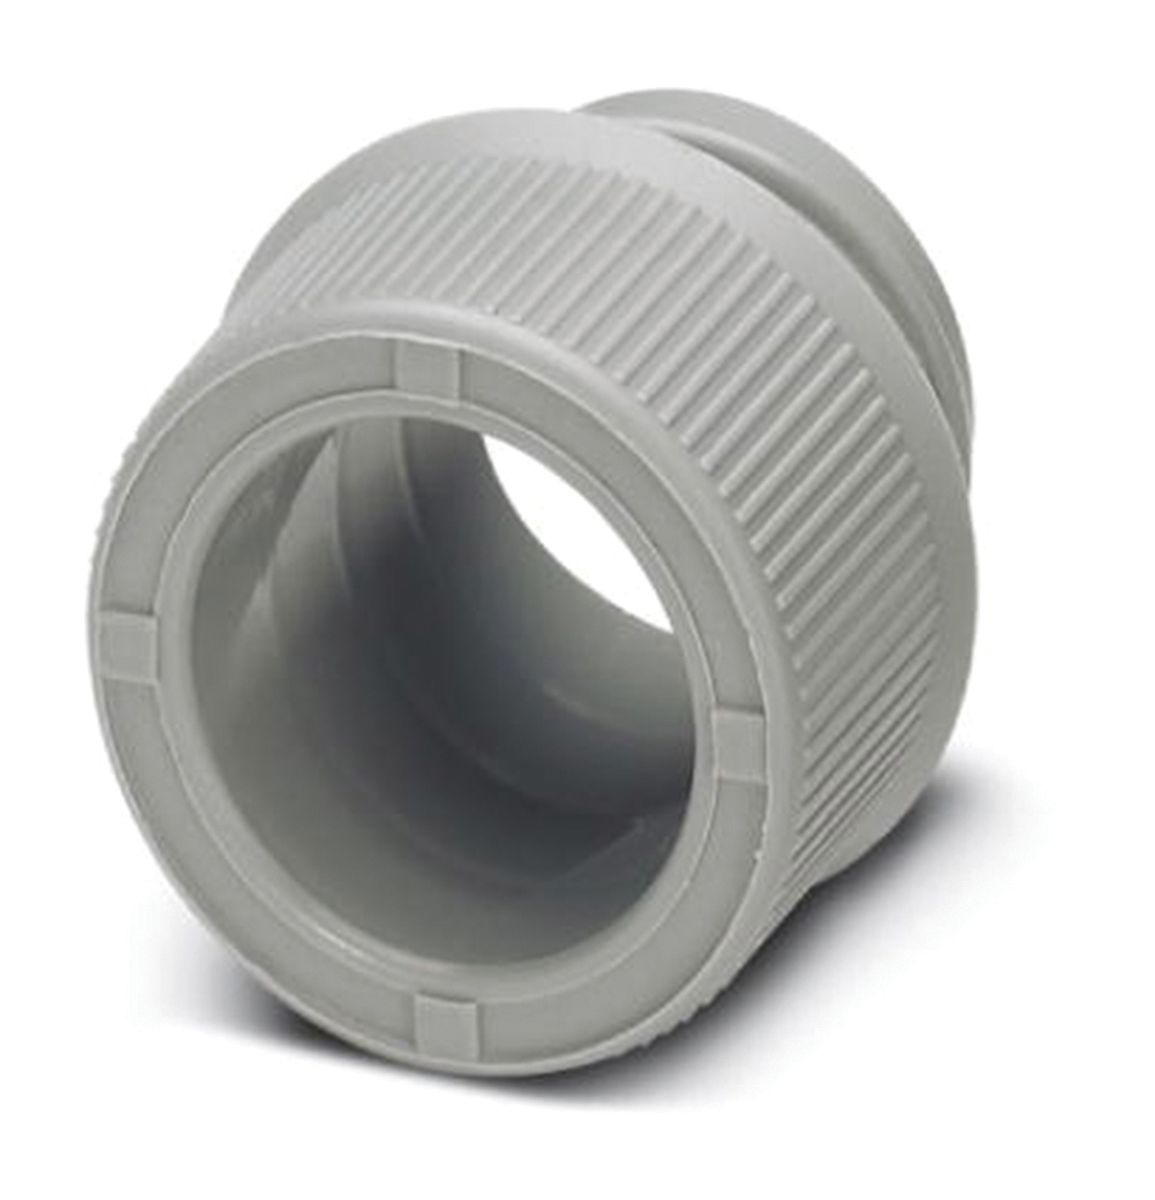 Phoenix Contact End Sleeve, Conduit Fitting, 7mm Nominal Size, PP, Grey